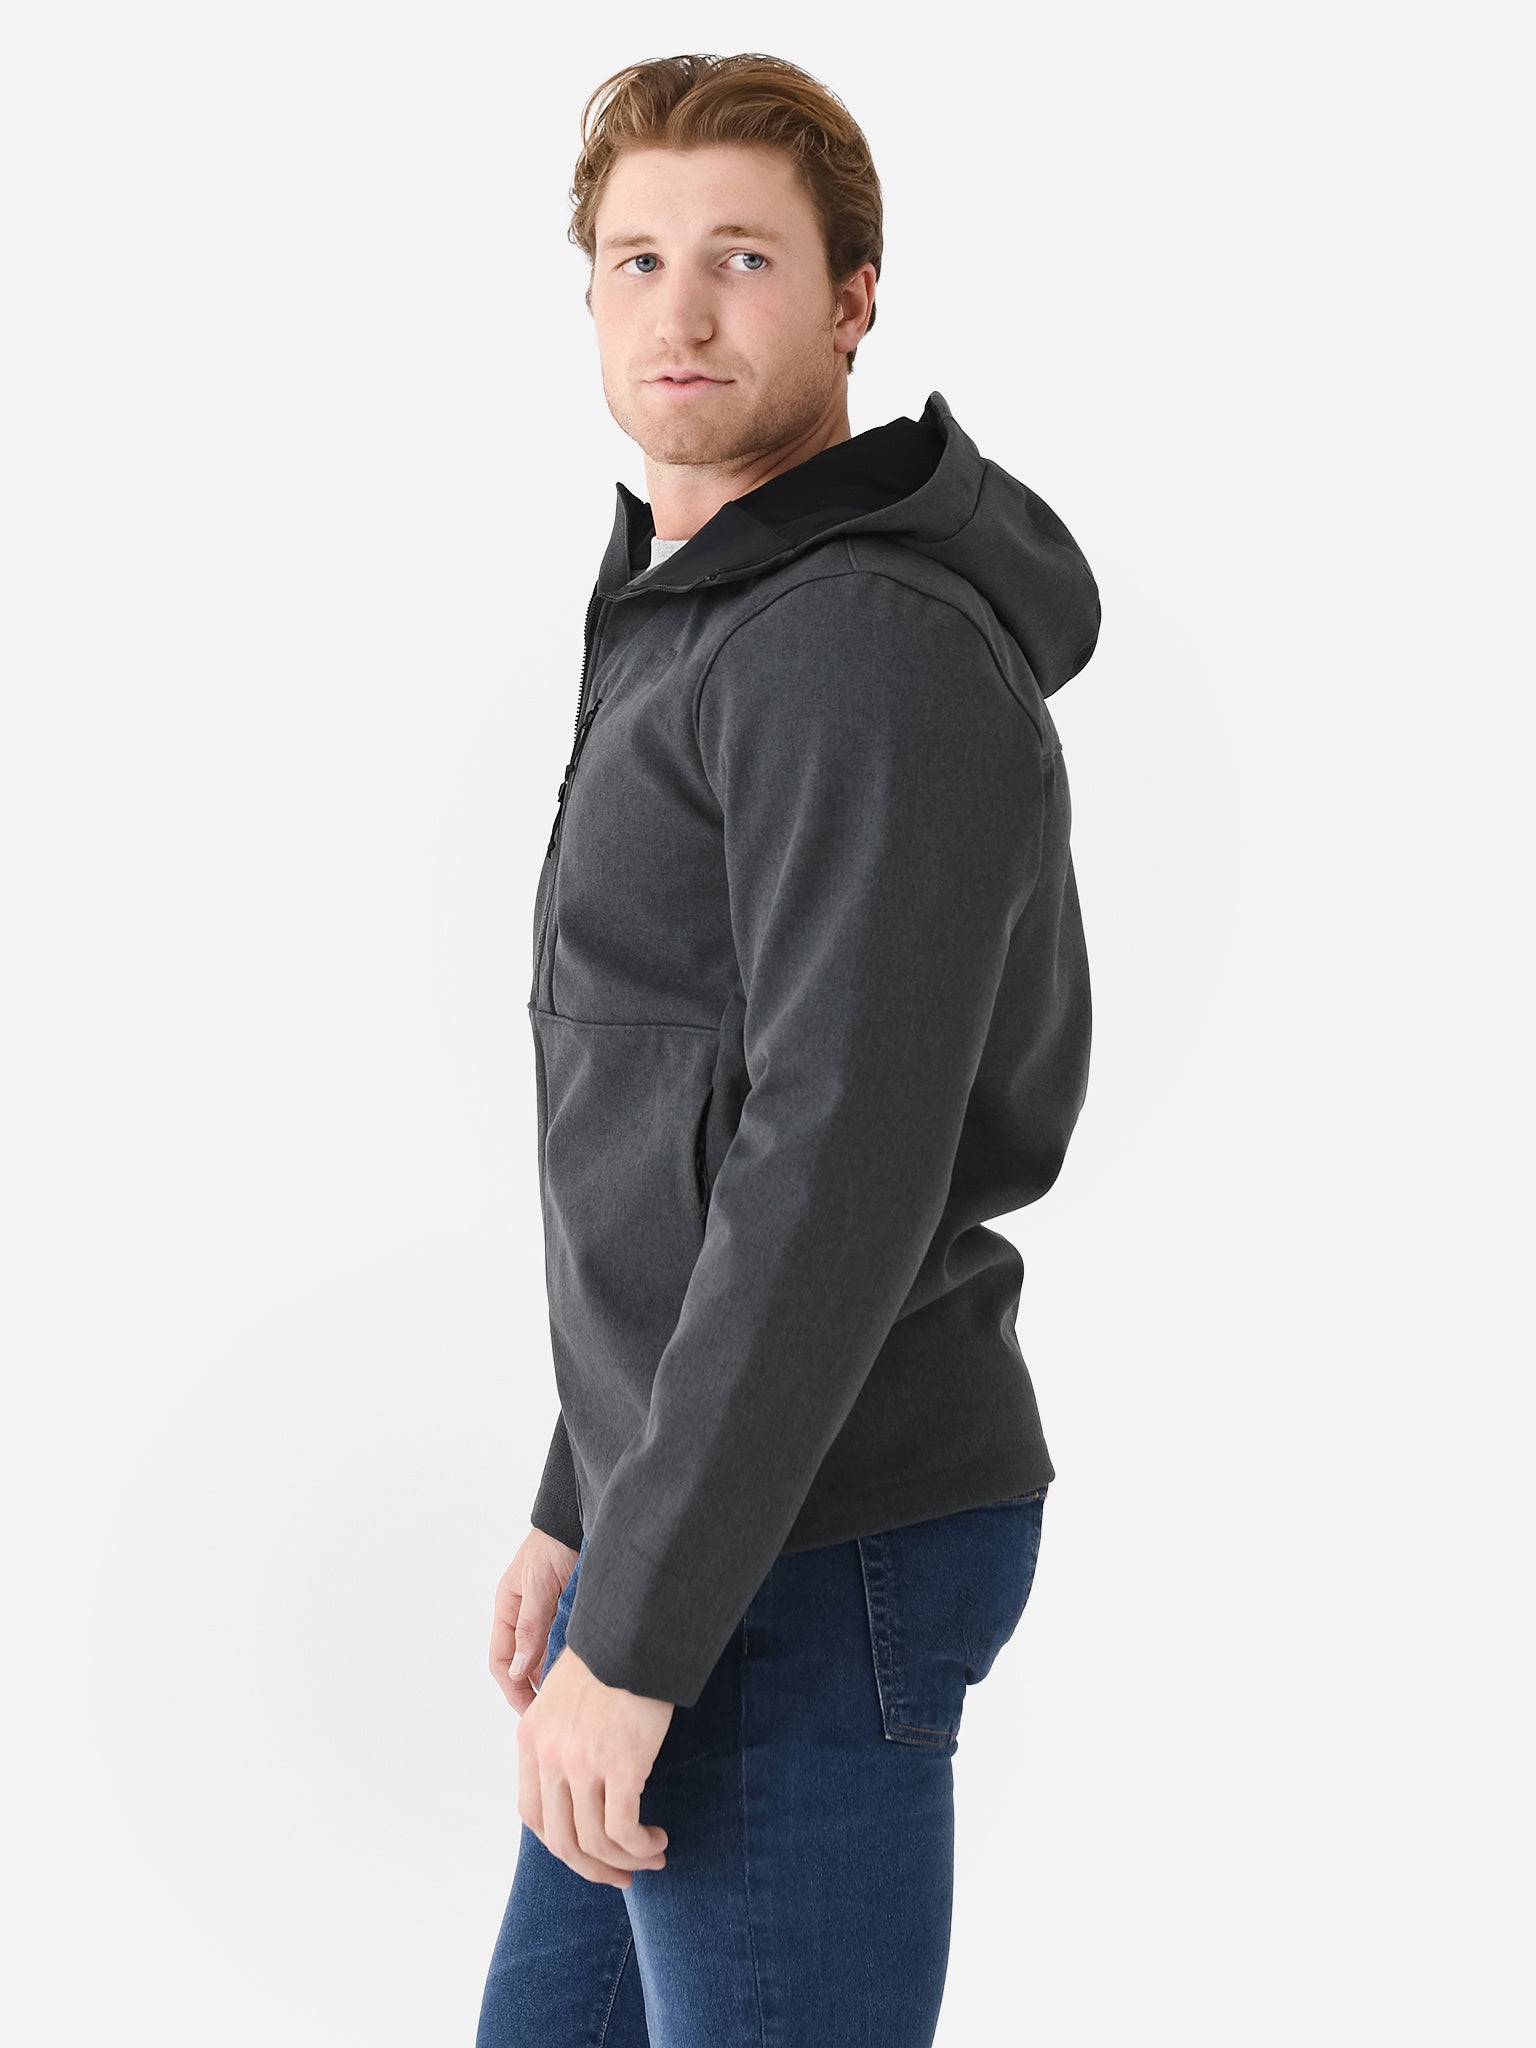 The North Face Men's Apex Bionic 3 Hoodie